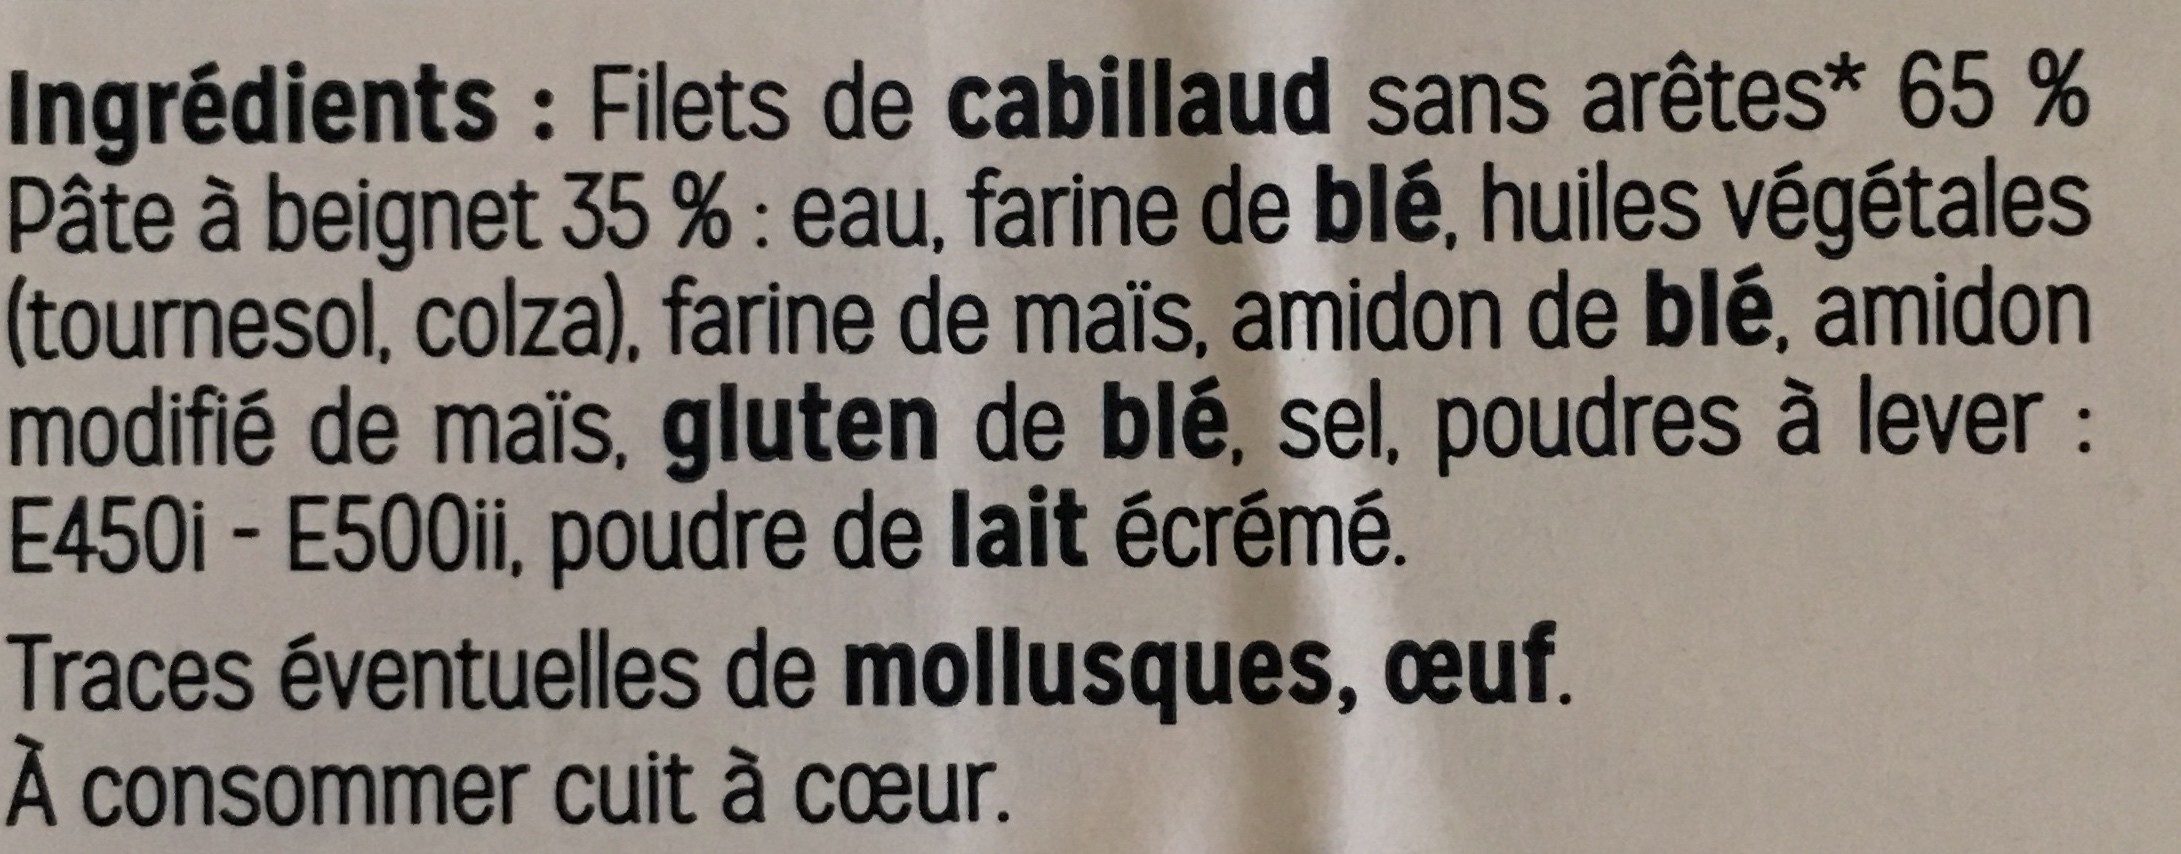 Filets De Cabillaud Facon Fish And Chips - Ingredients - fr